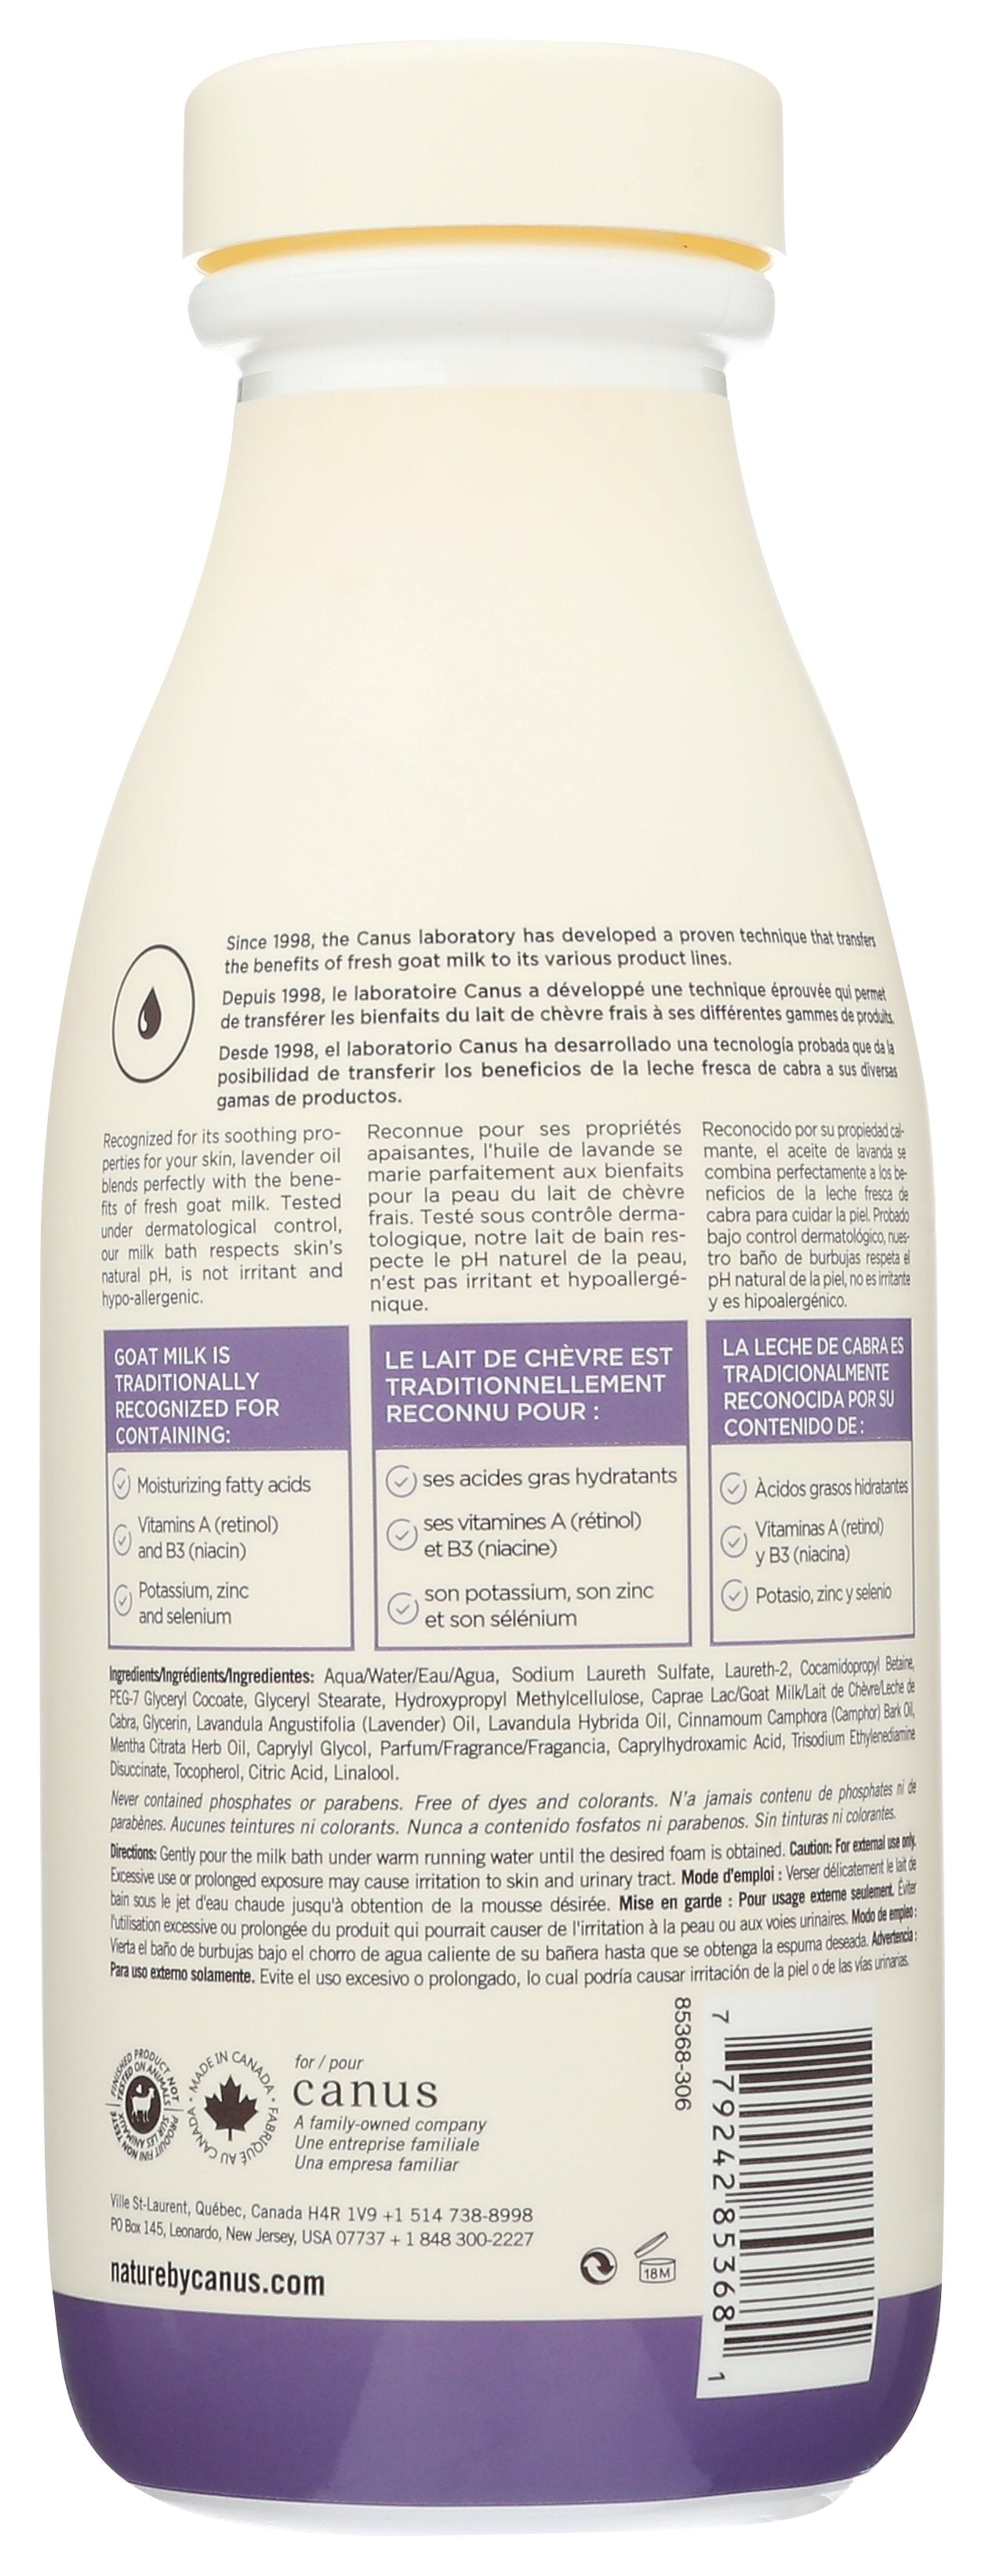 NATURE BY CANUS BATH MILK FOAMG LAVNDR - Case of 3